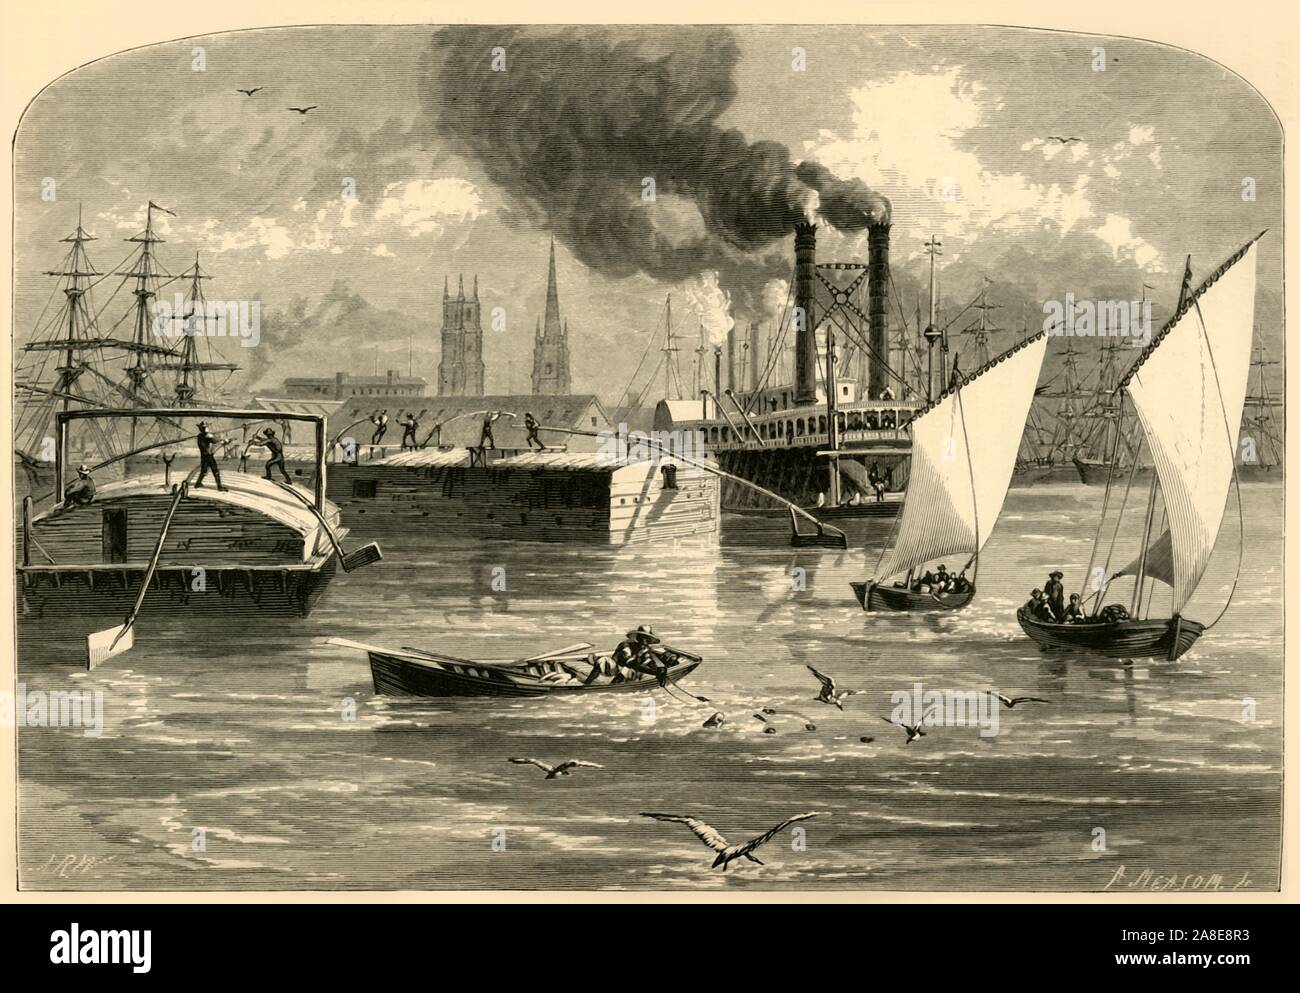 'The Mississippi at New Orleans', 1872. Sailing boats and paddle steamers on the Mississippi River at the port of New Orleans, Louisiana, USA. From &quot;Picturesque America; or, The Land We Live In, A Delineation by Pen and Pencil of the Mountains, Rivers, Lakes...with Illustrations on Steel and Wood by Eminent American Artists&quot; Vol. I, edited by William Cullen Bryant. [D. Appleton and Company, New York, 1872] Stock Photo